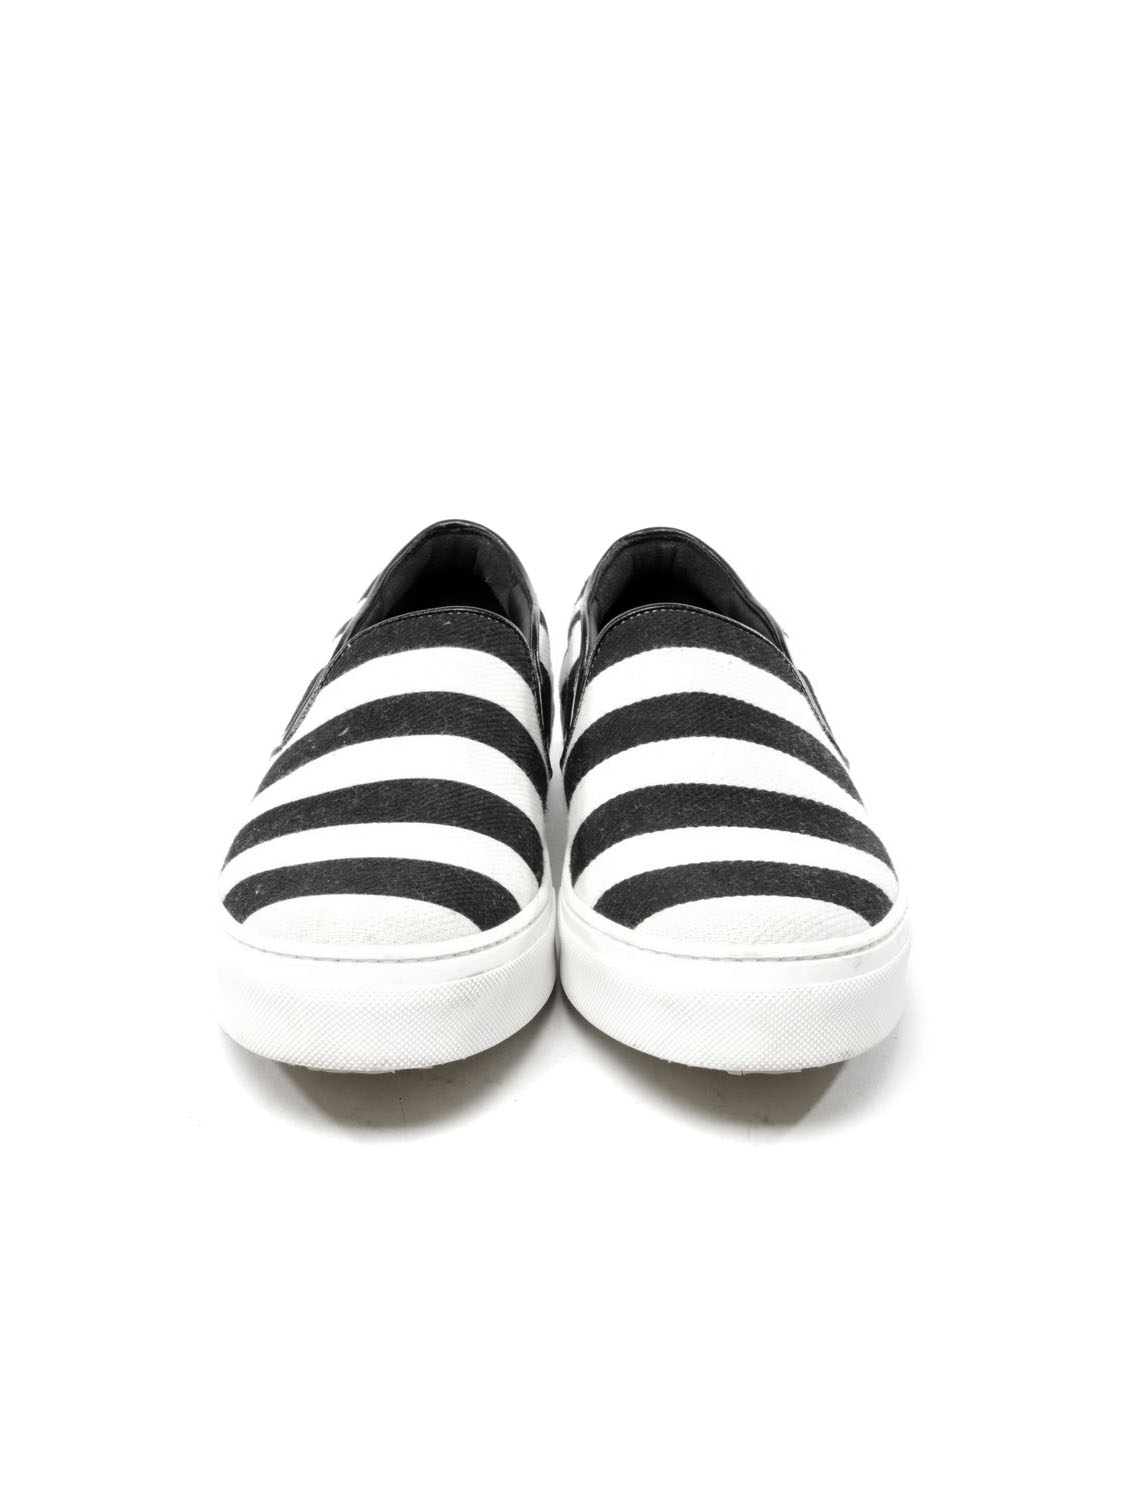 black and white striped slippers